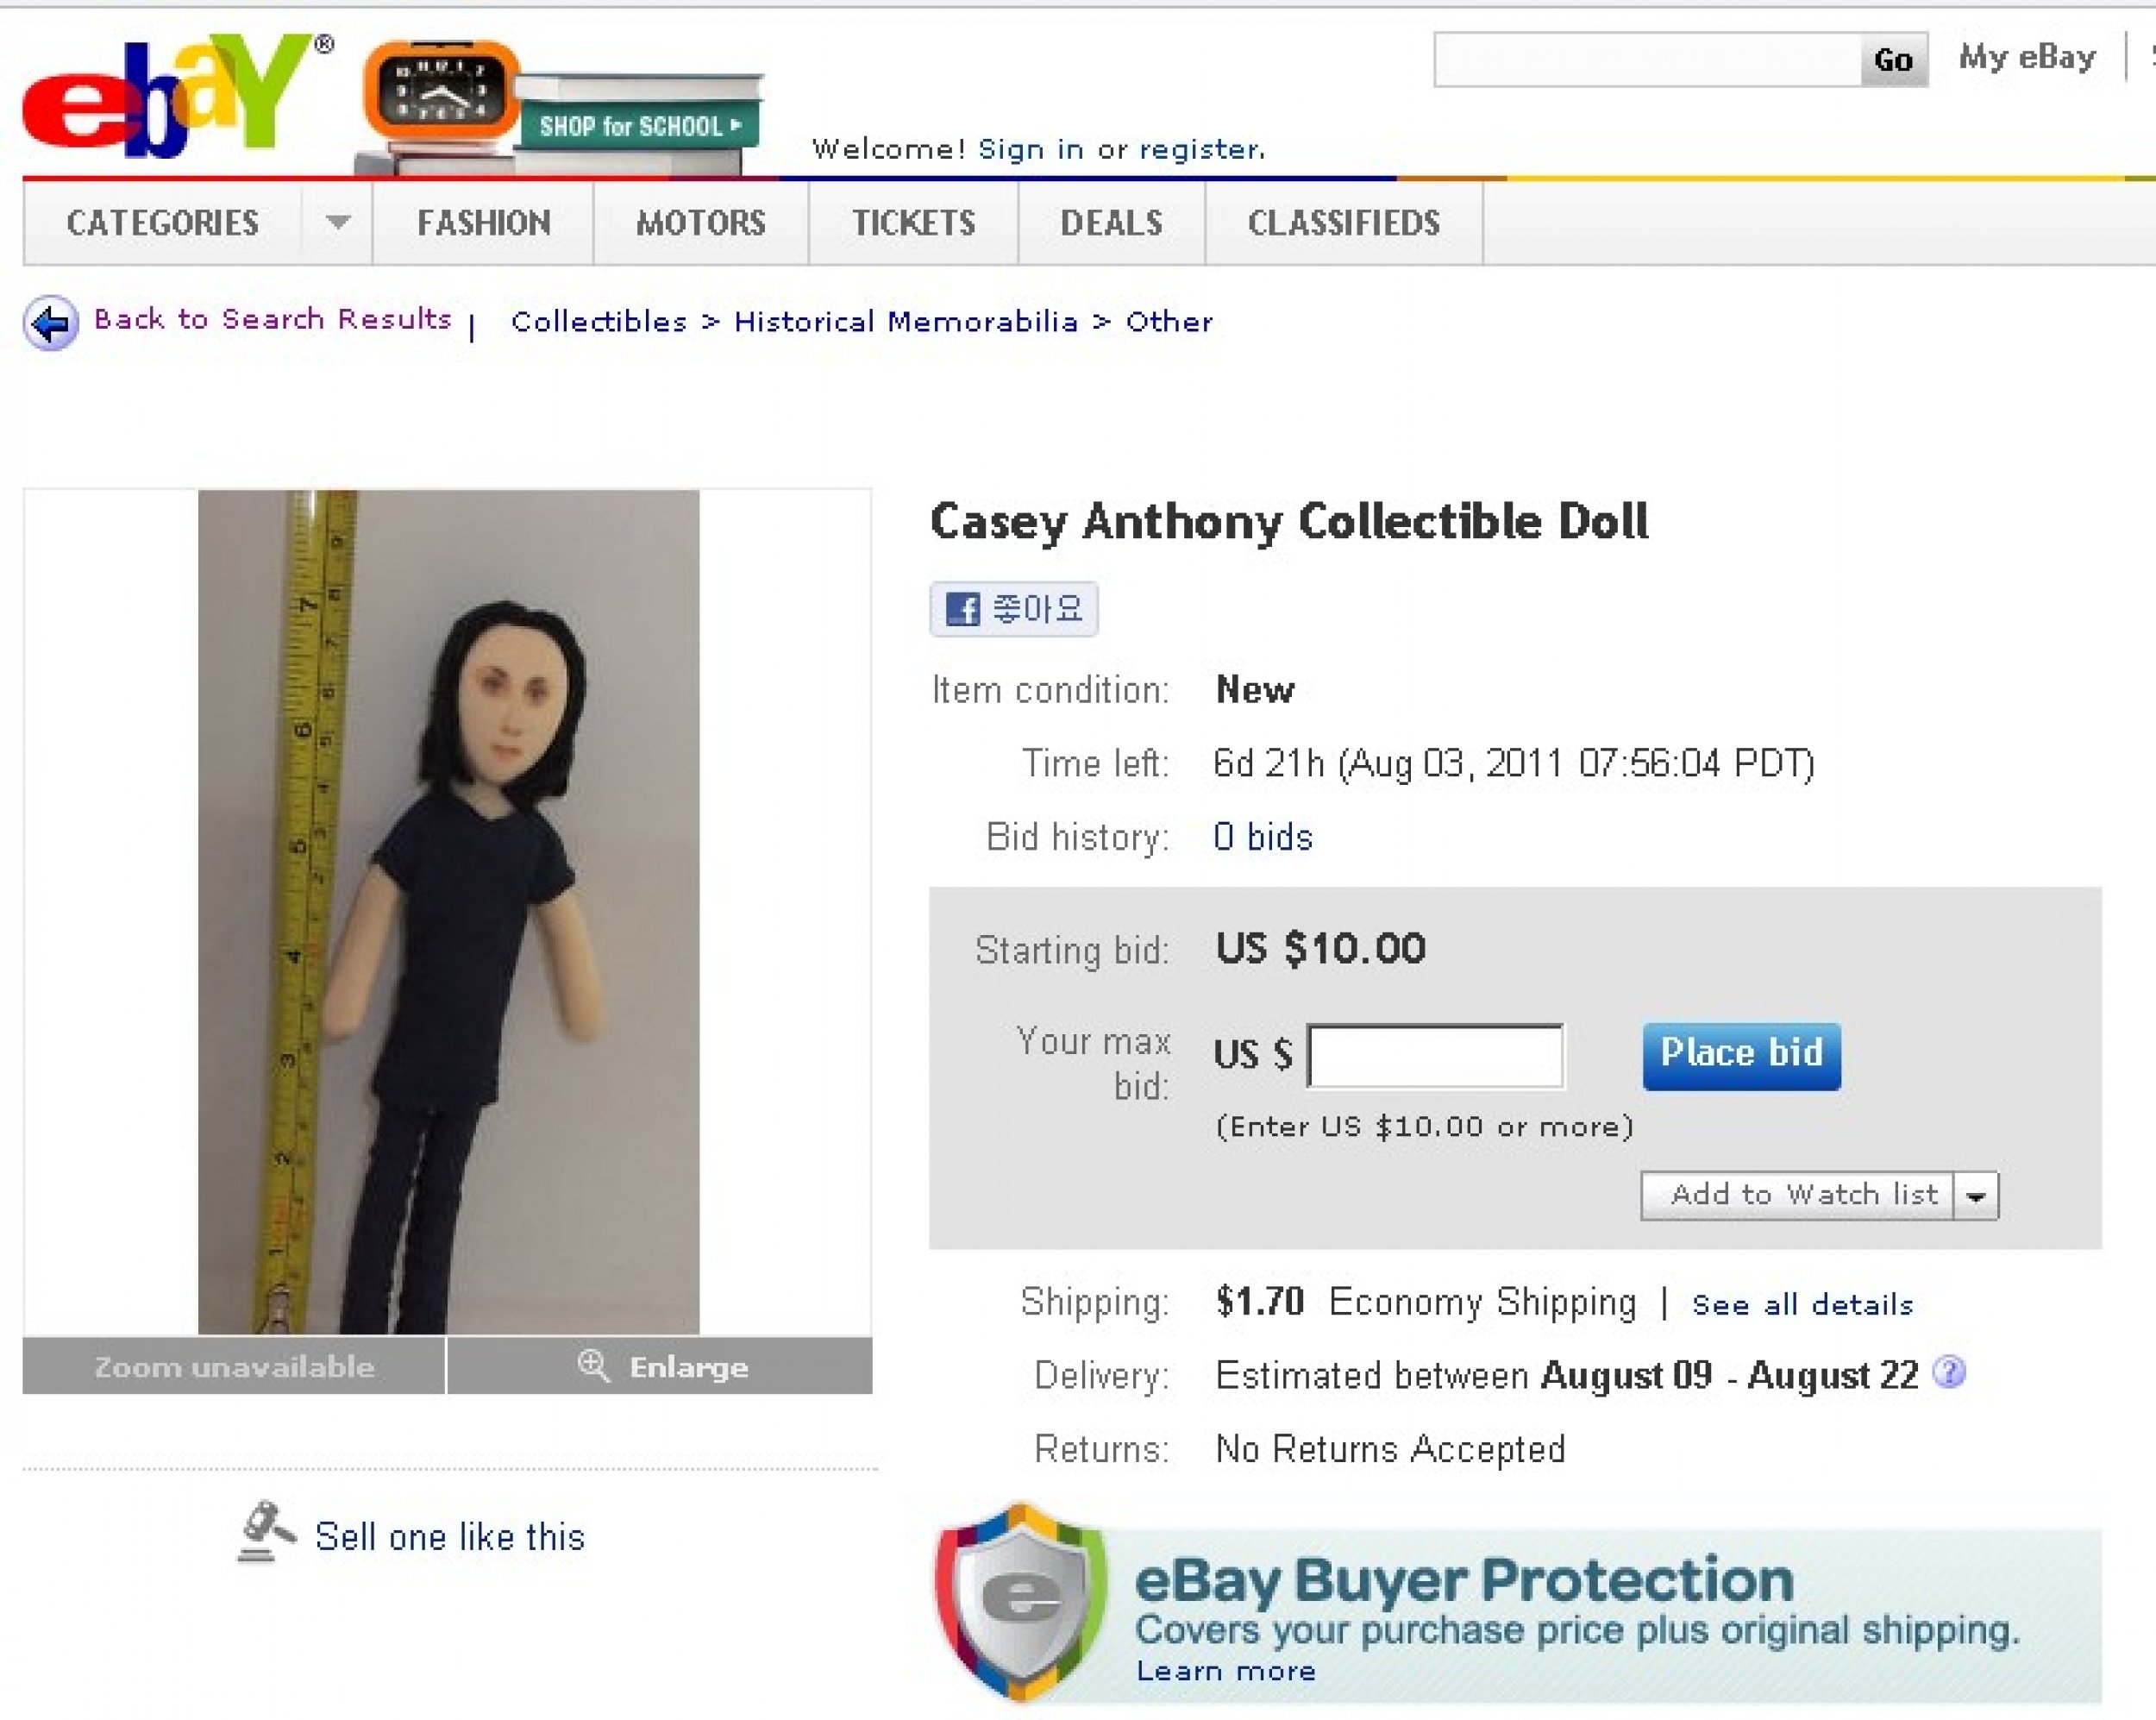 Casey Anthony Collectible Doll